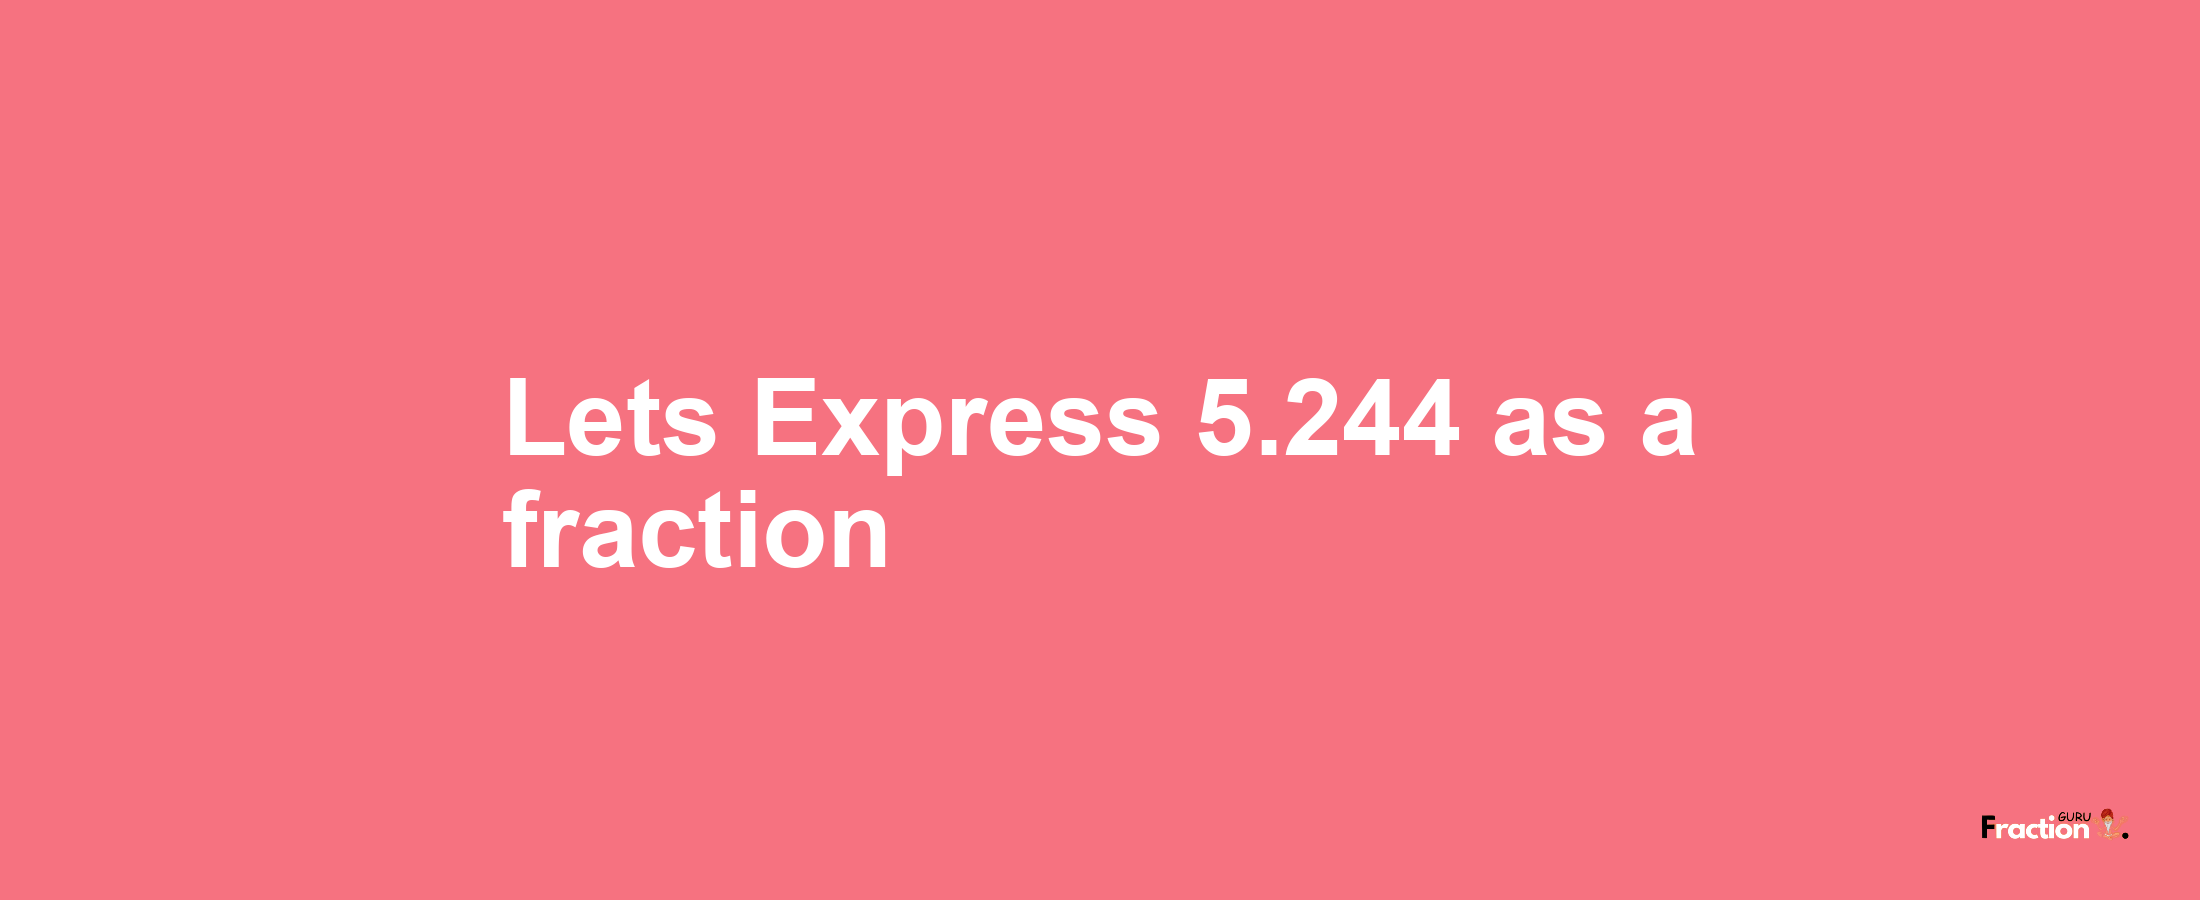 Lets Express 5.244 as afraction